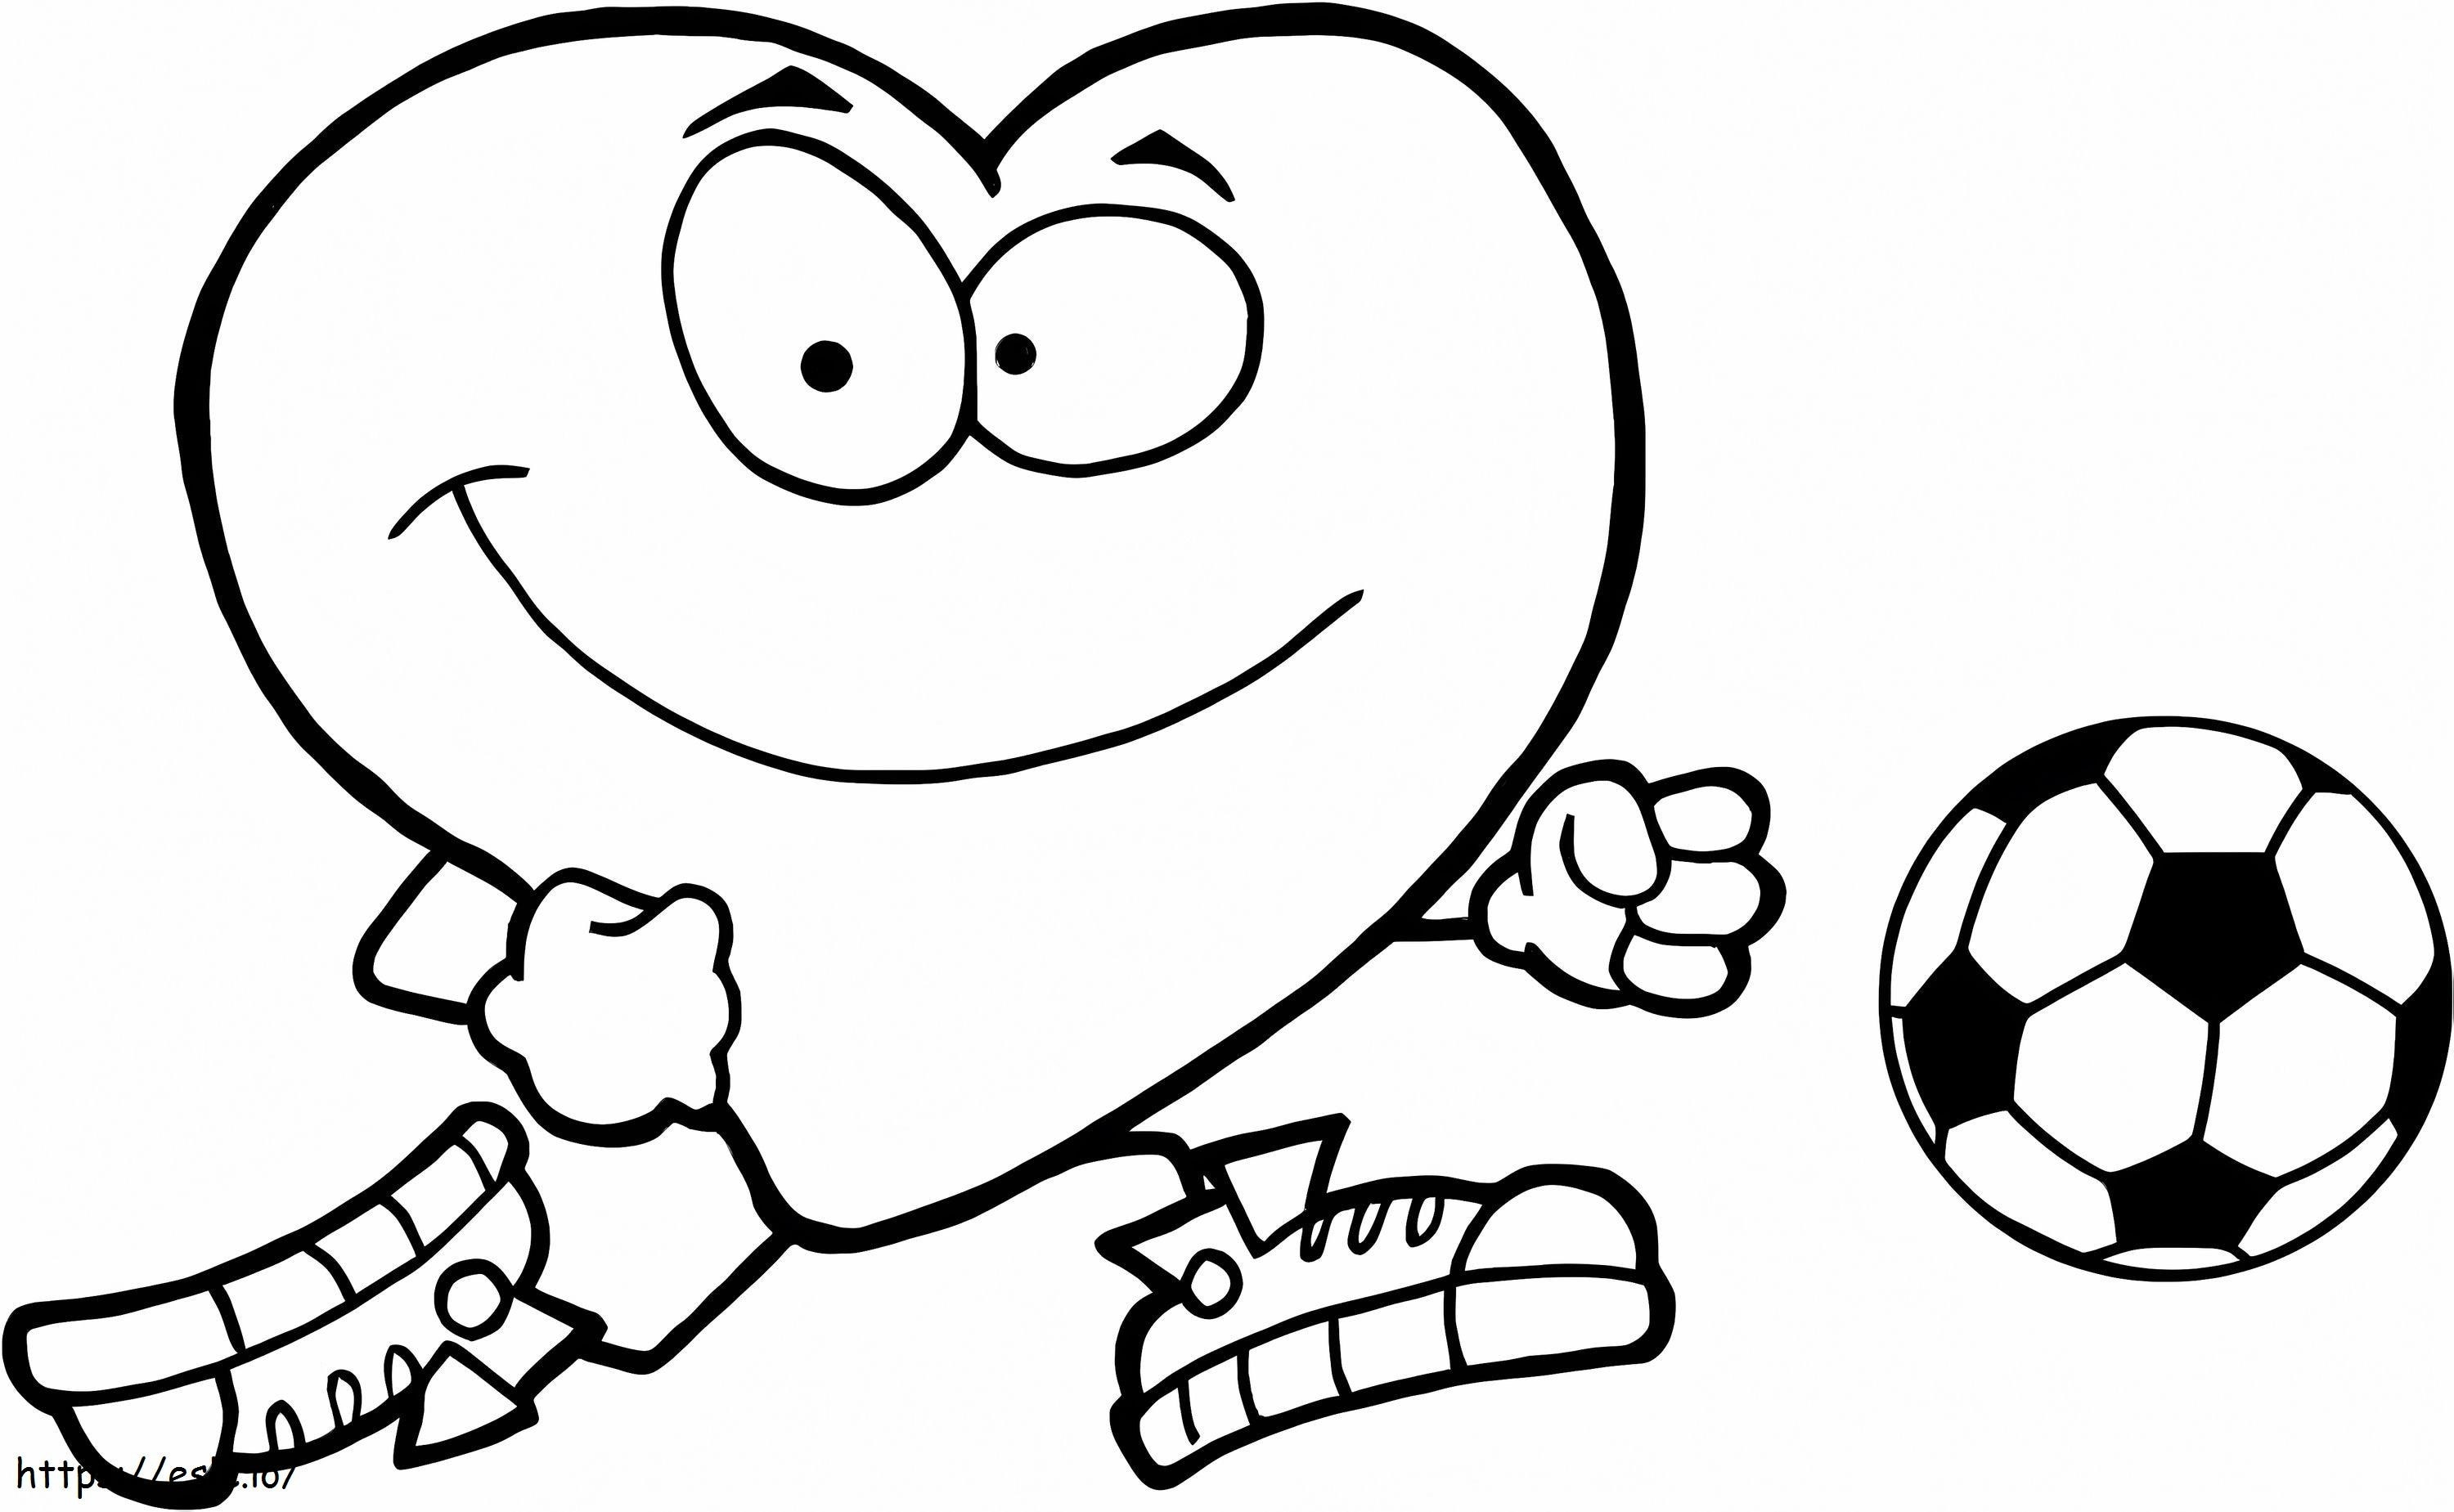 Smiling Heart Play Soccer coloring page